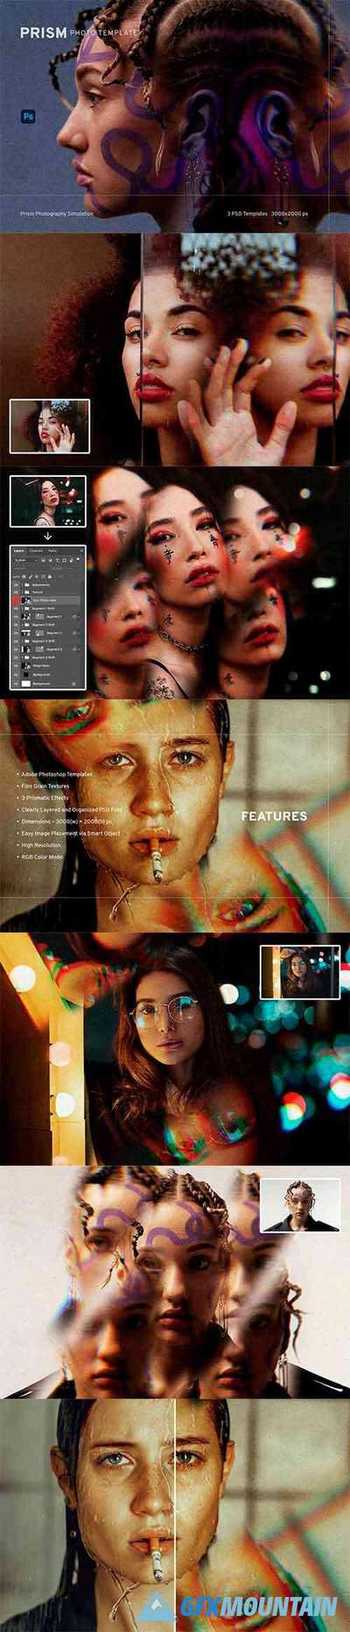 Prism Photo Template